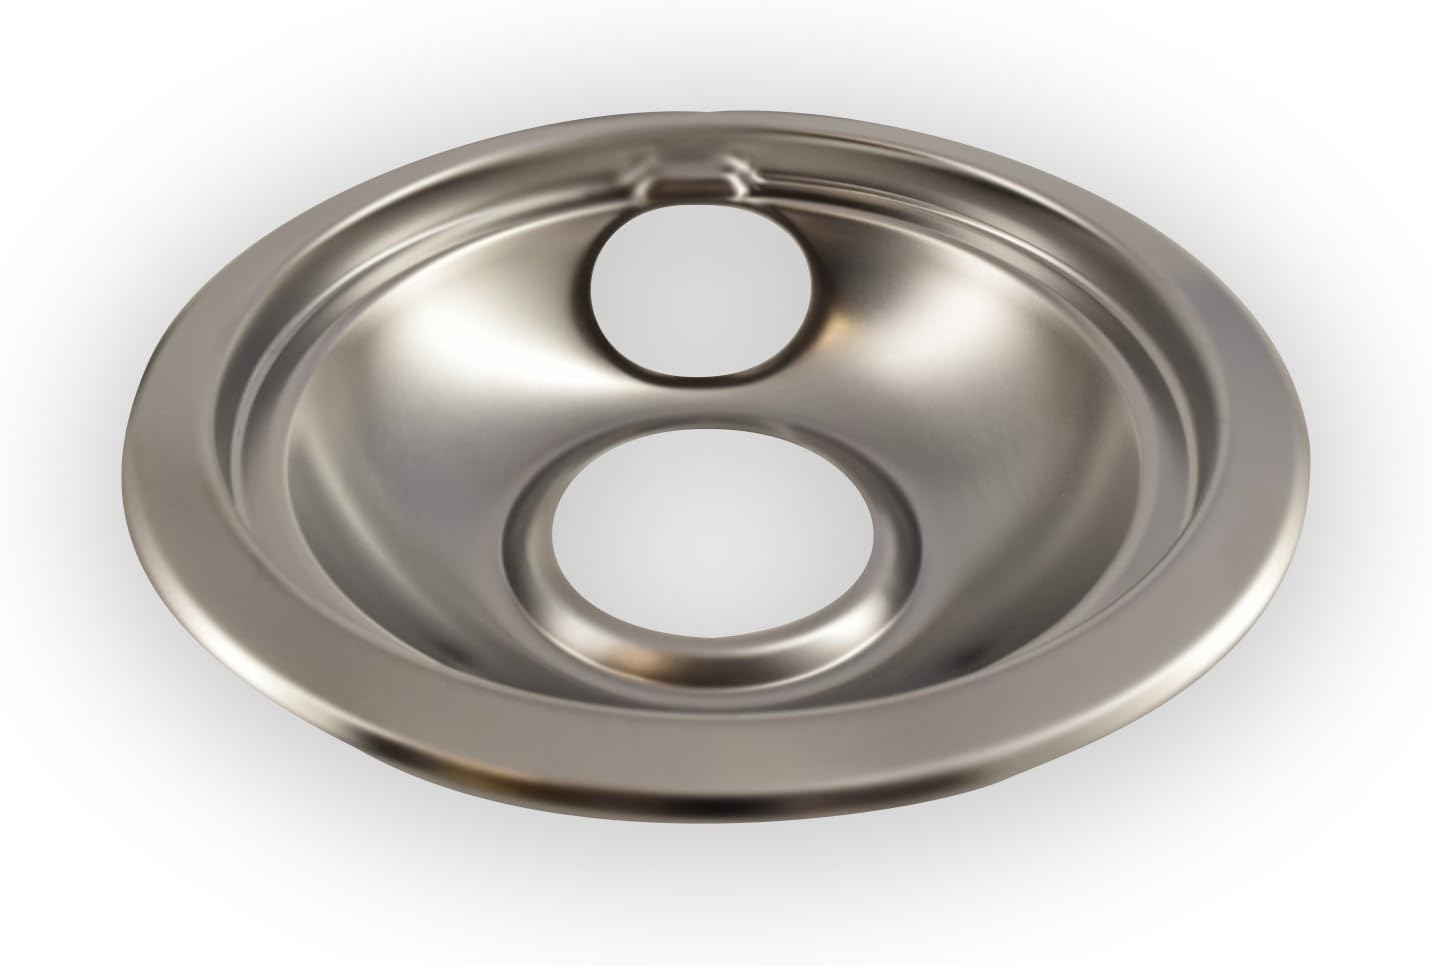 Vastu Aftermarket Replacement Drip Pans for Whirlpool Range - 2 Large 8" and 2 Small 6" Drip Bowl Pans - Set of 4 - x2 of W